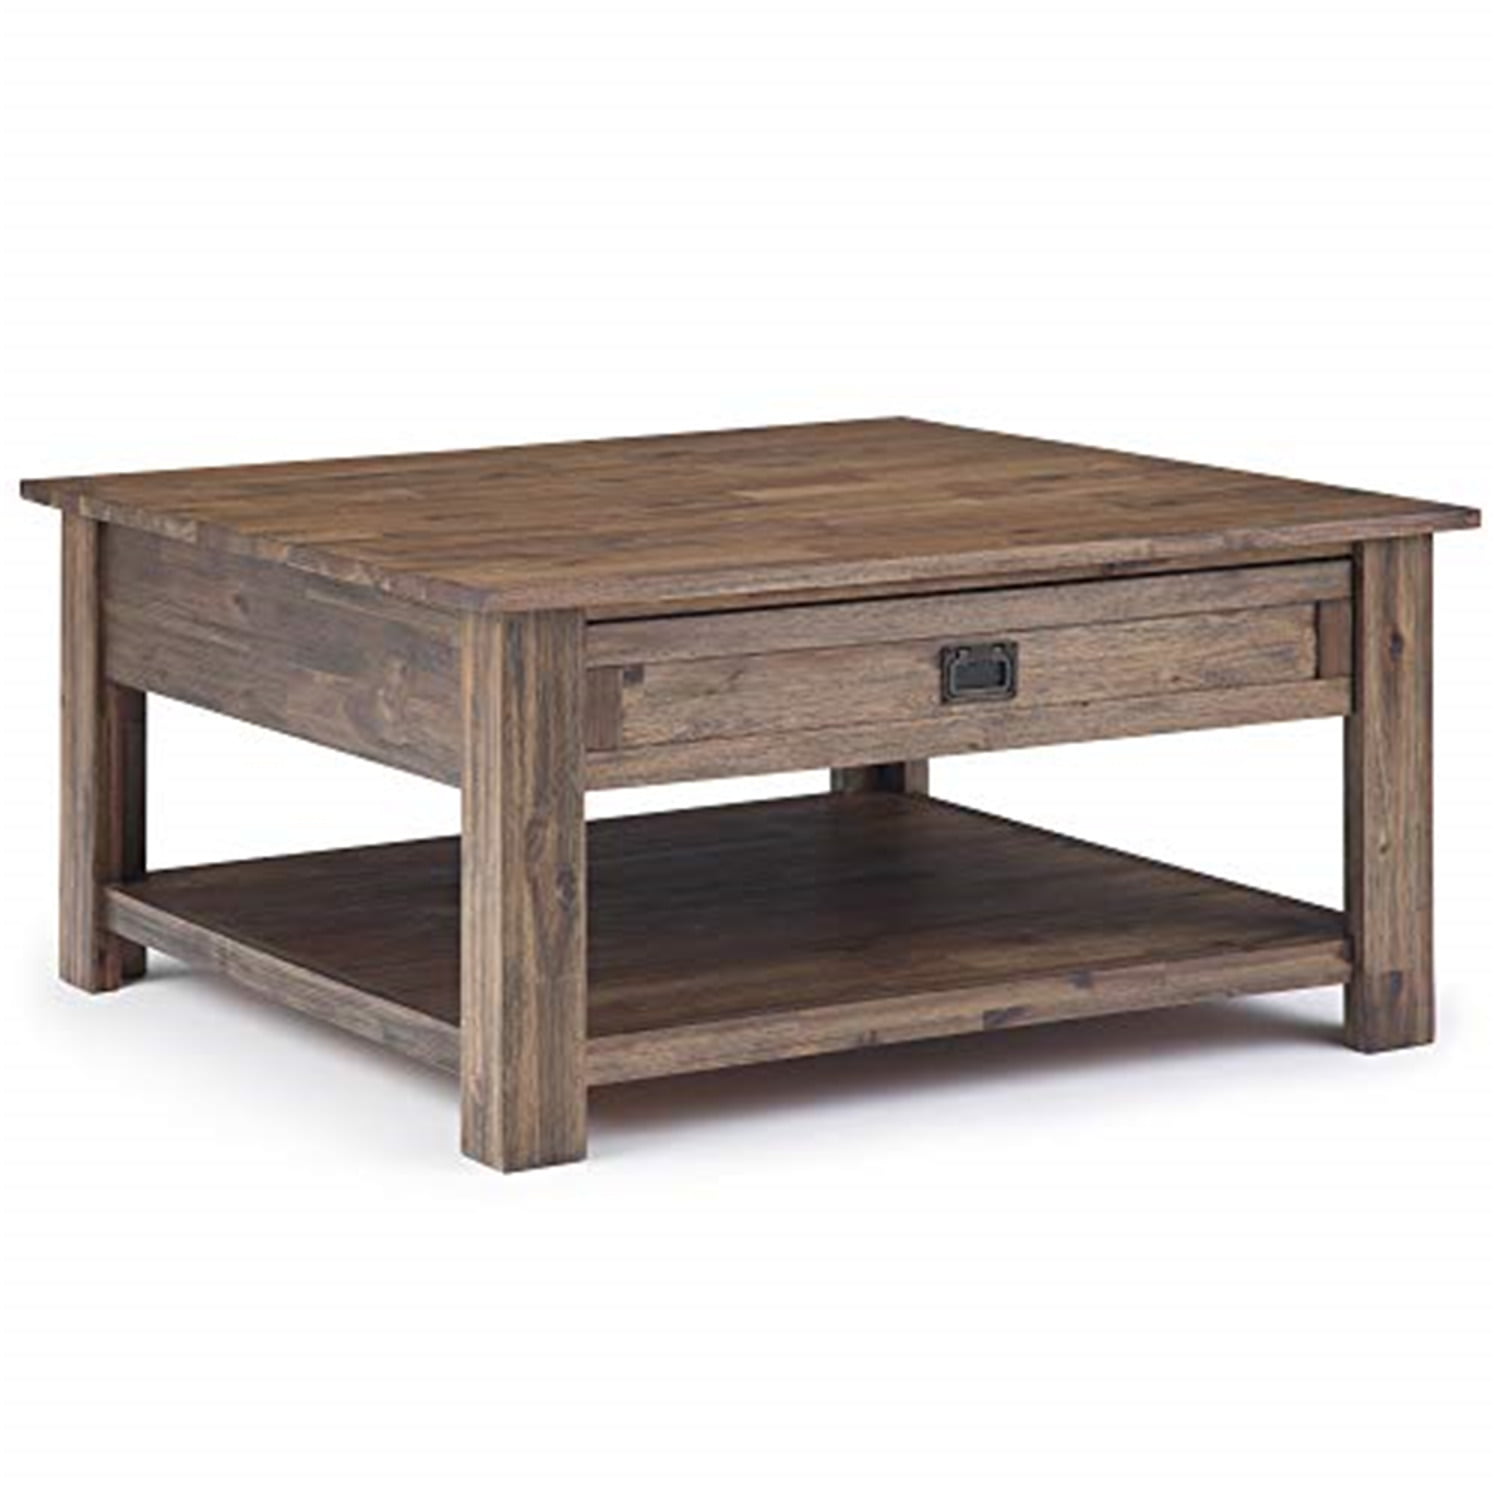 Wide Square Rustic Coffee Table, Large Wood End Table With Drawers